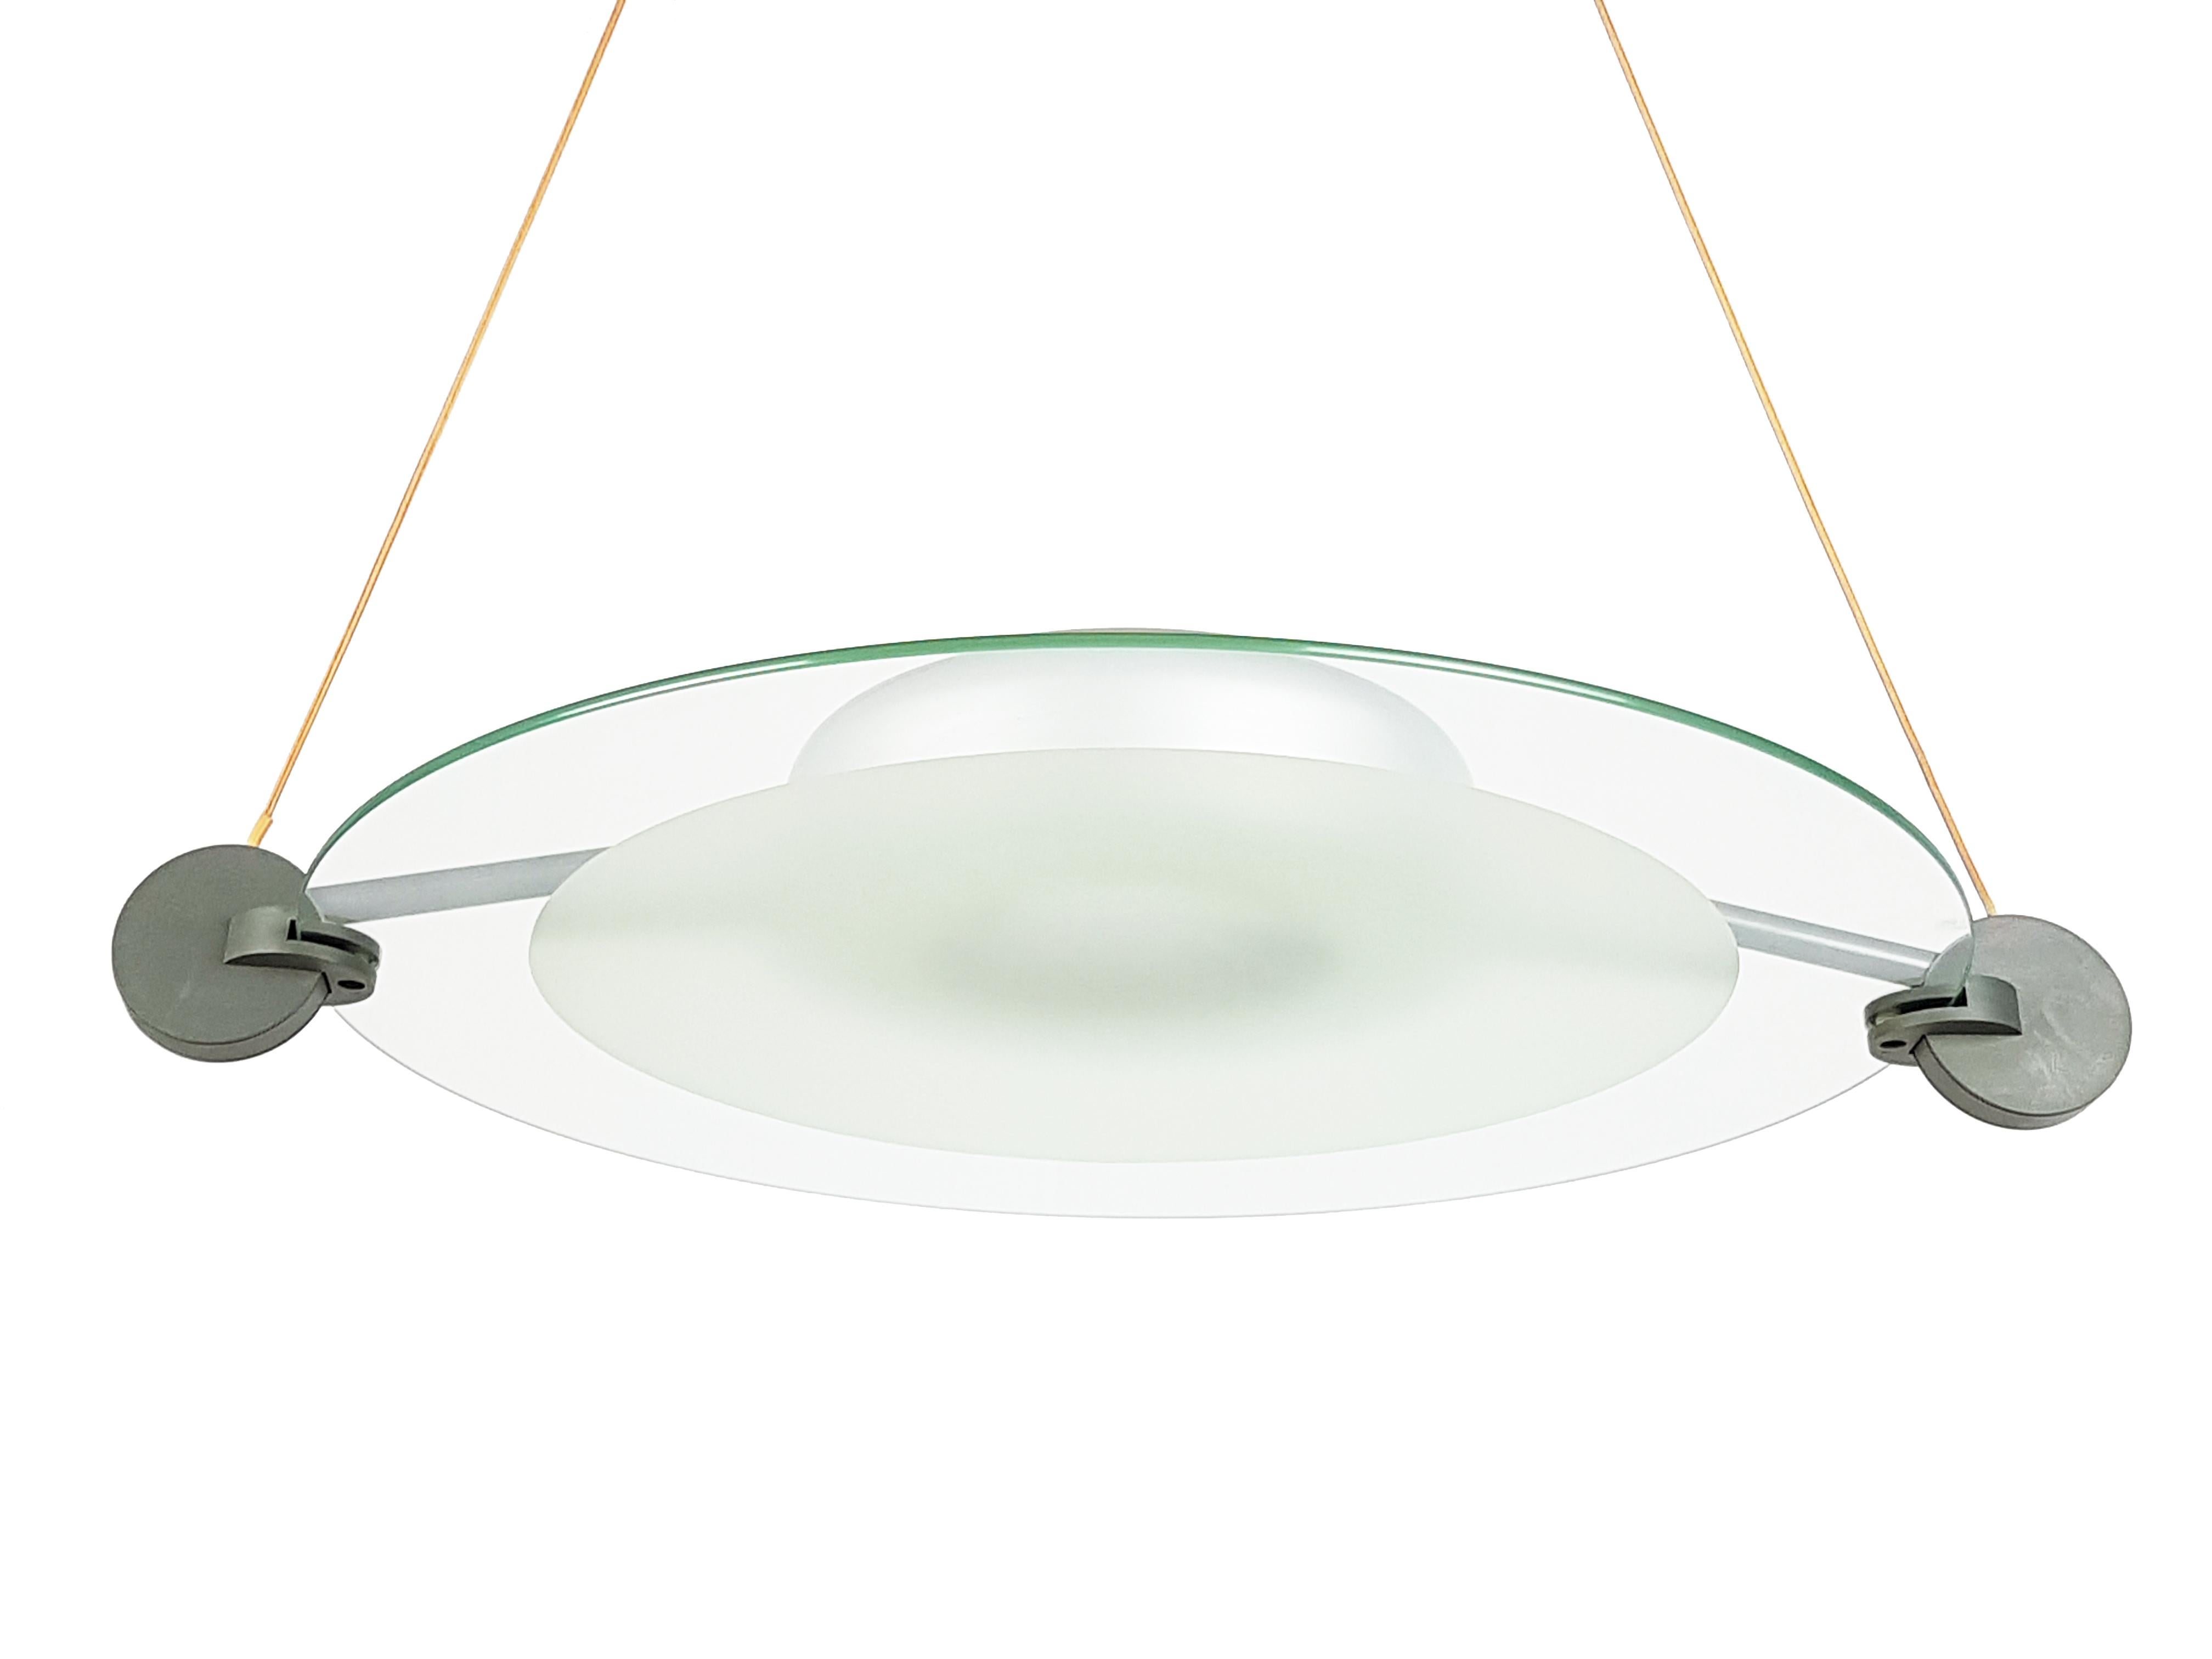 This Postmodern pendant is made from a grey plastic and silver metal structure with a round sandblasted glass shade. It features 2 lamp E27 sockets and remains in very good condition.
A flush mount lamp from the same serie is also available.